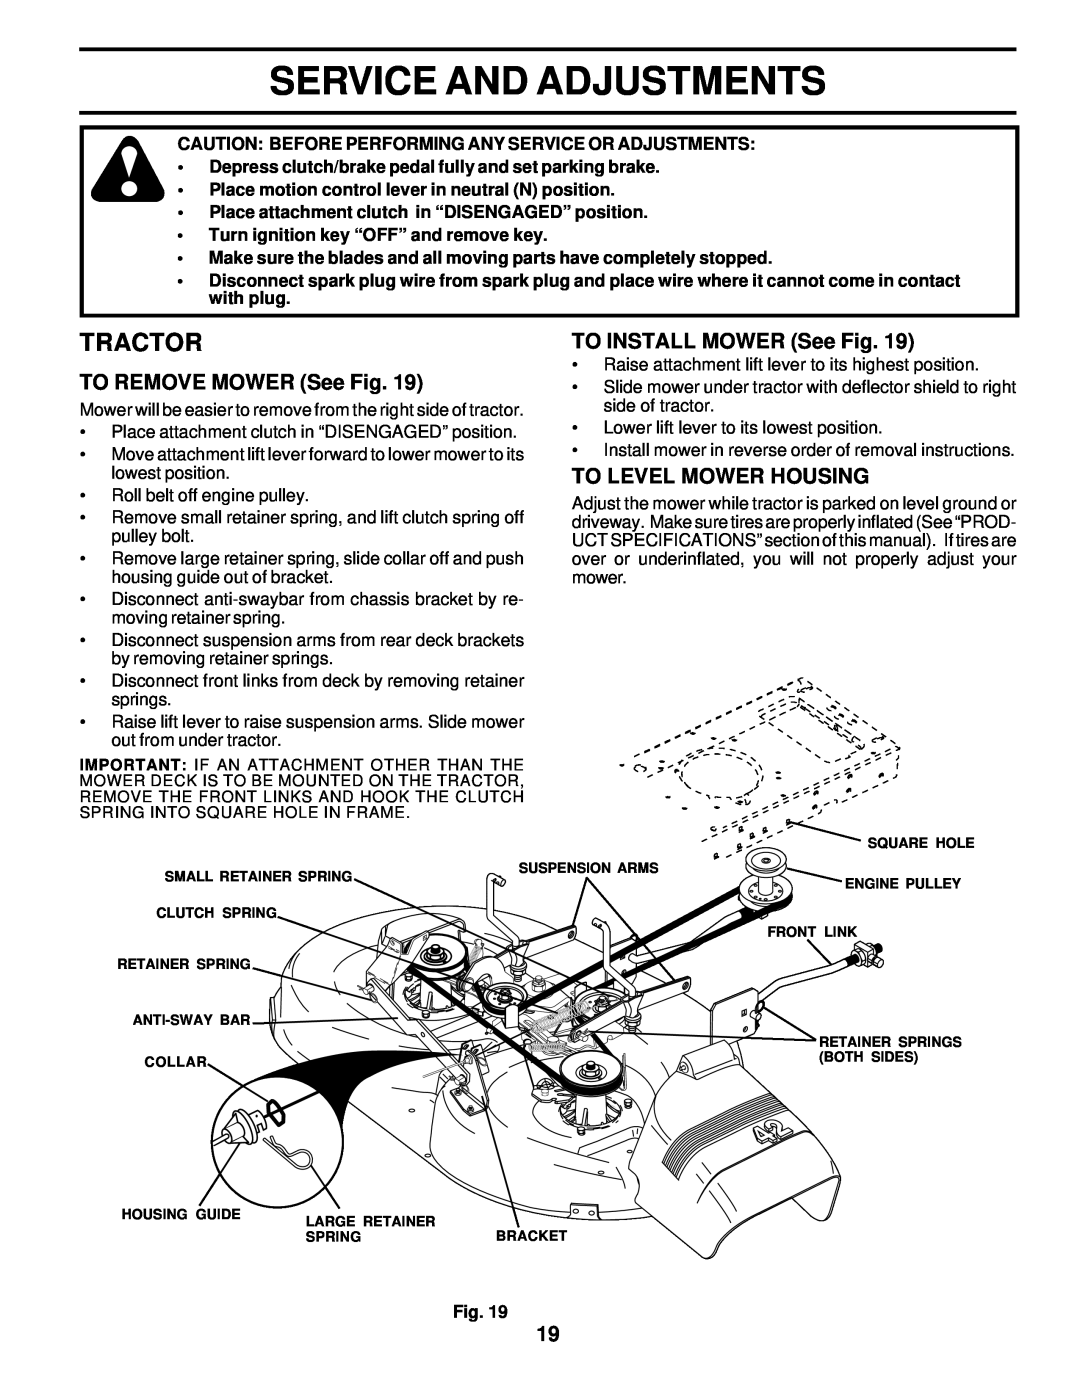 Poulan 178219 Service And Adjustments, TO REMOVE MOWER See Fig, TO INSTALL MOWER See Fig, To Level Mower Housing, Tractor 